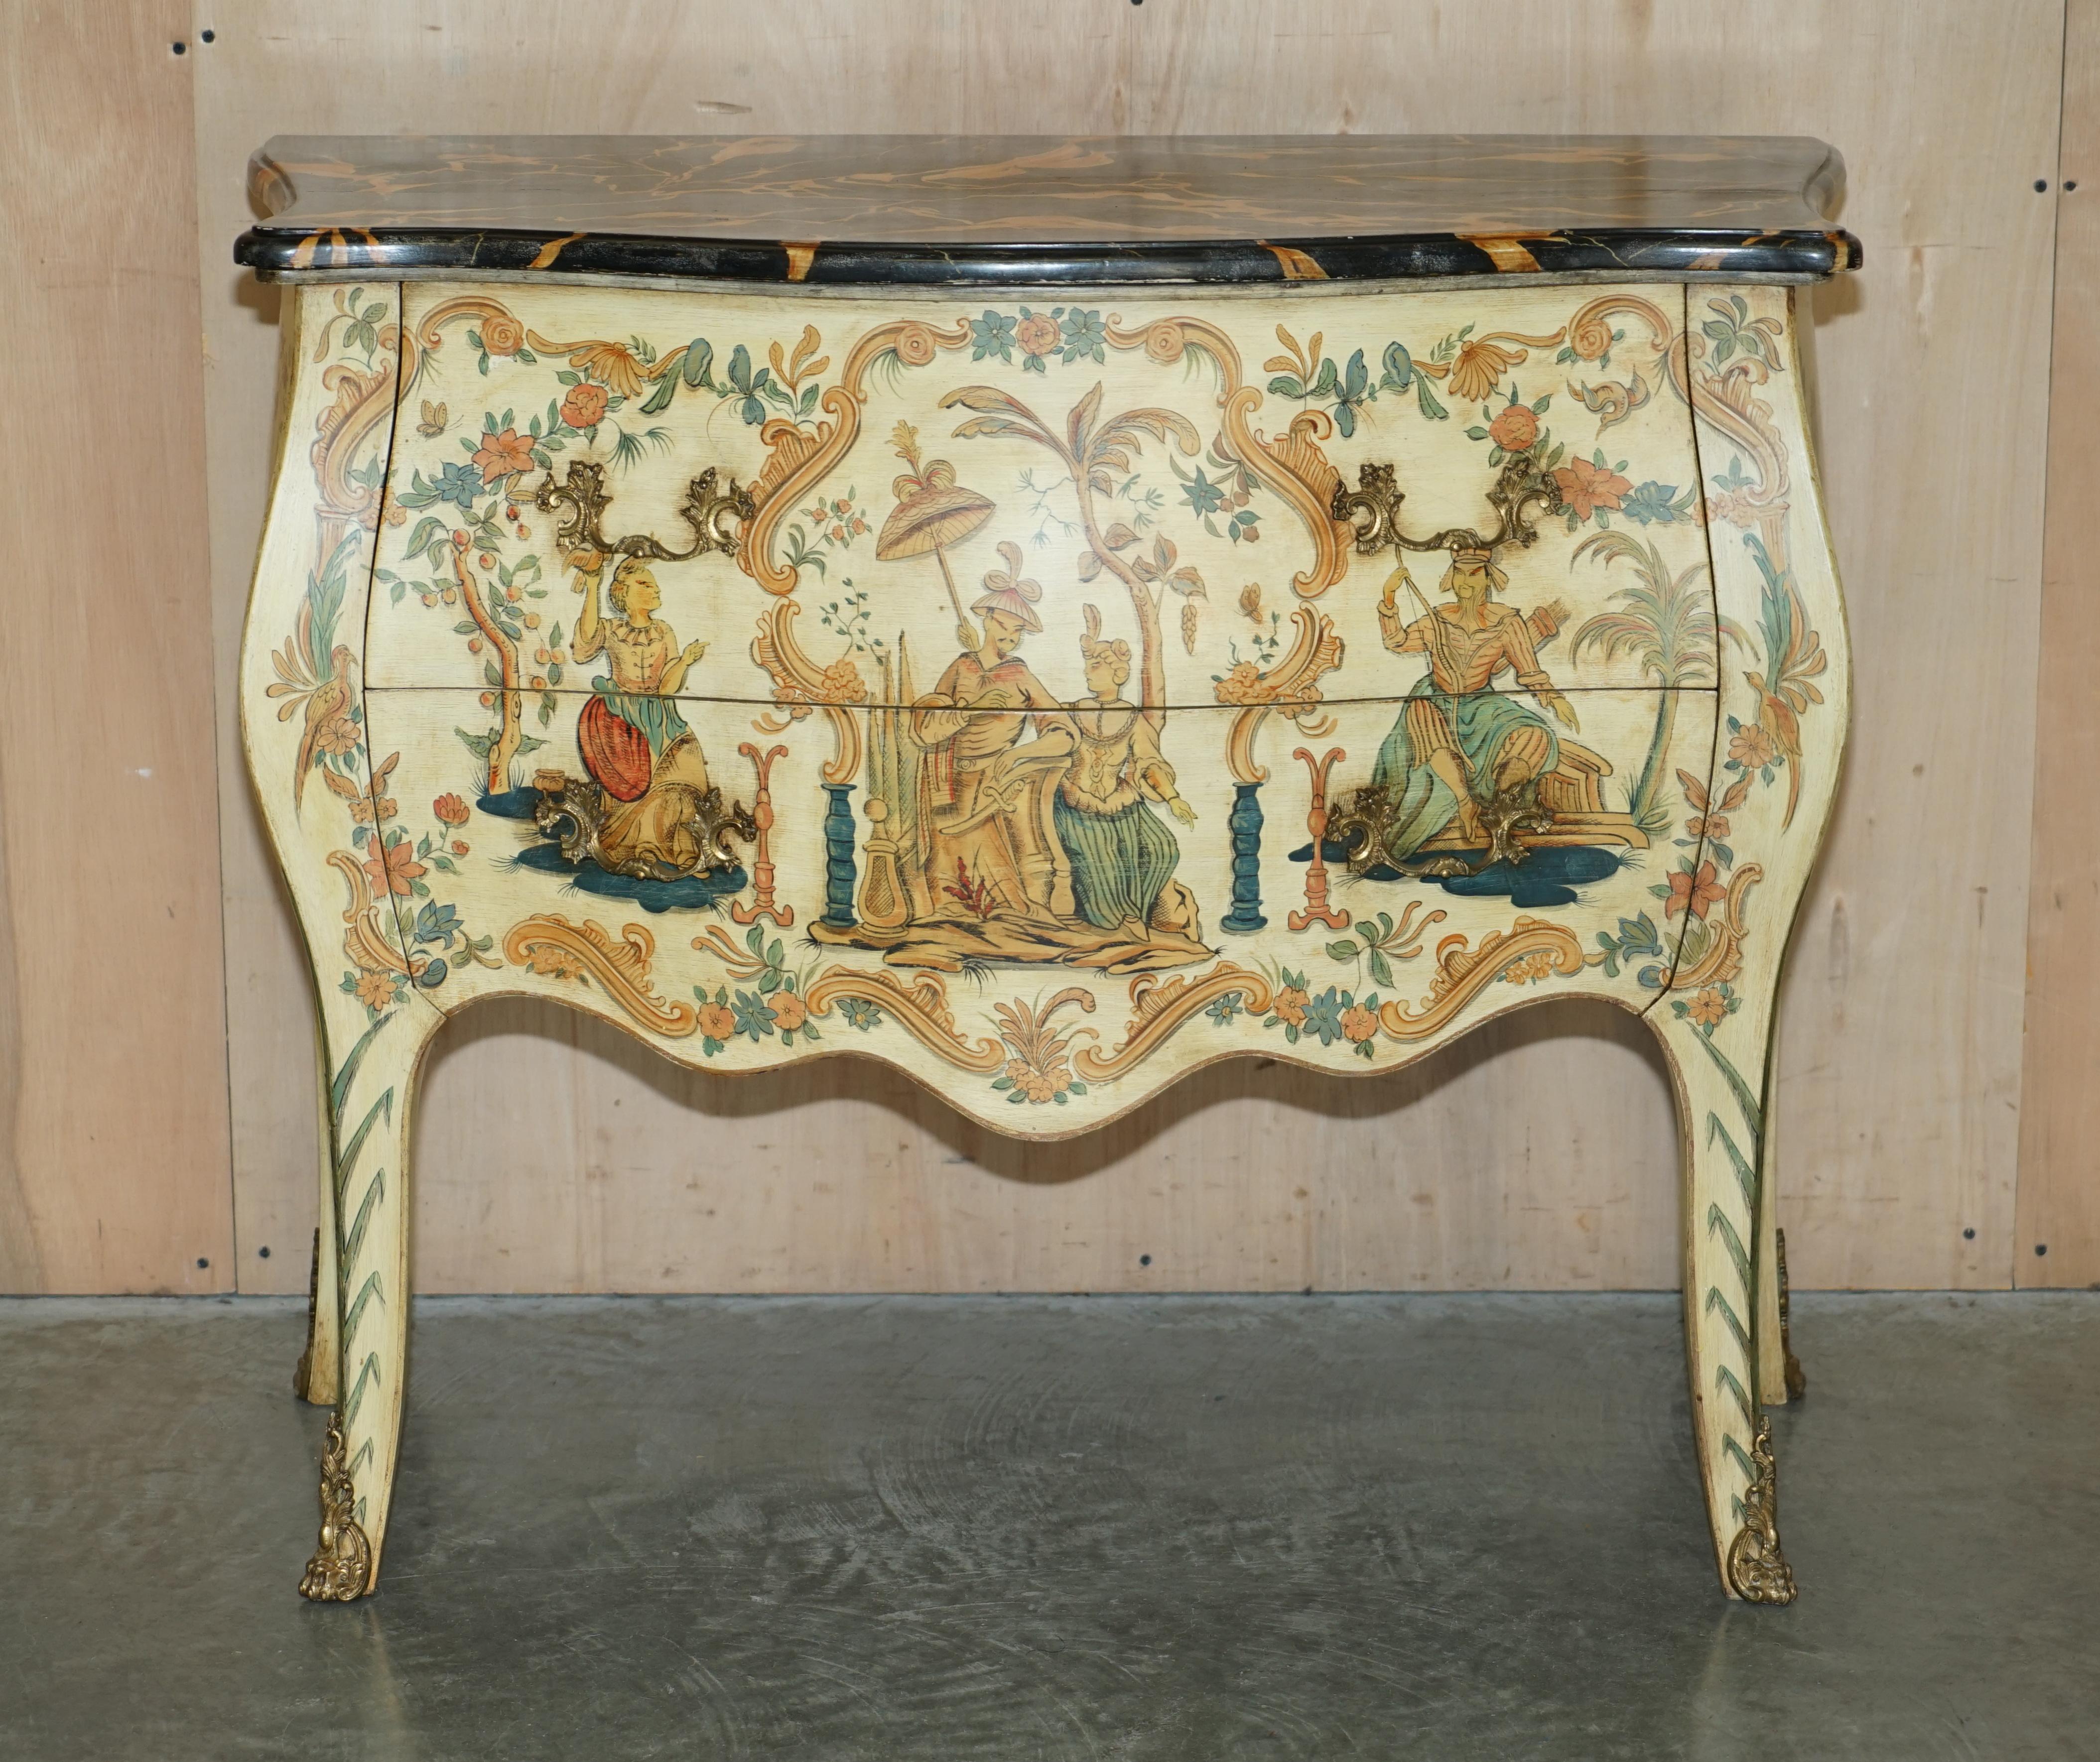 We are delighted to offer for sale this stunning hand painted marbled painted topped Chinoiserie Chinese Chippendale taste bombe commode 

Please note the delivery fee listed is just a guide, it covers within the M25 only for the UK and local